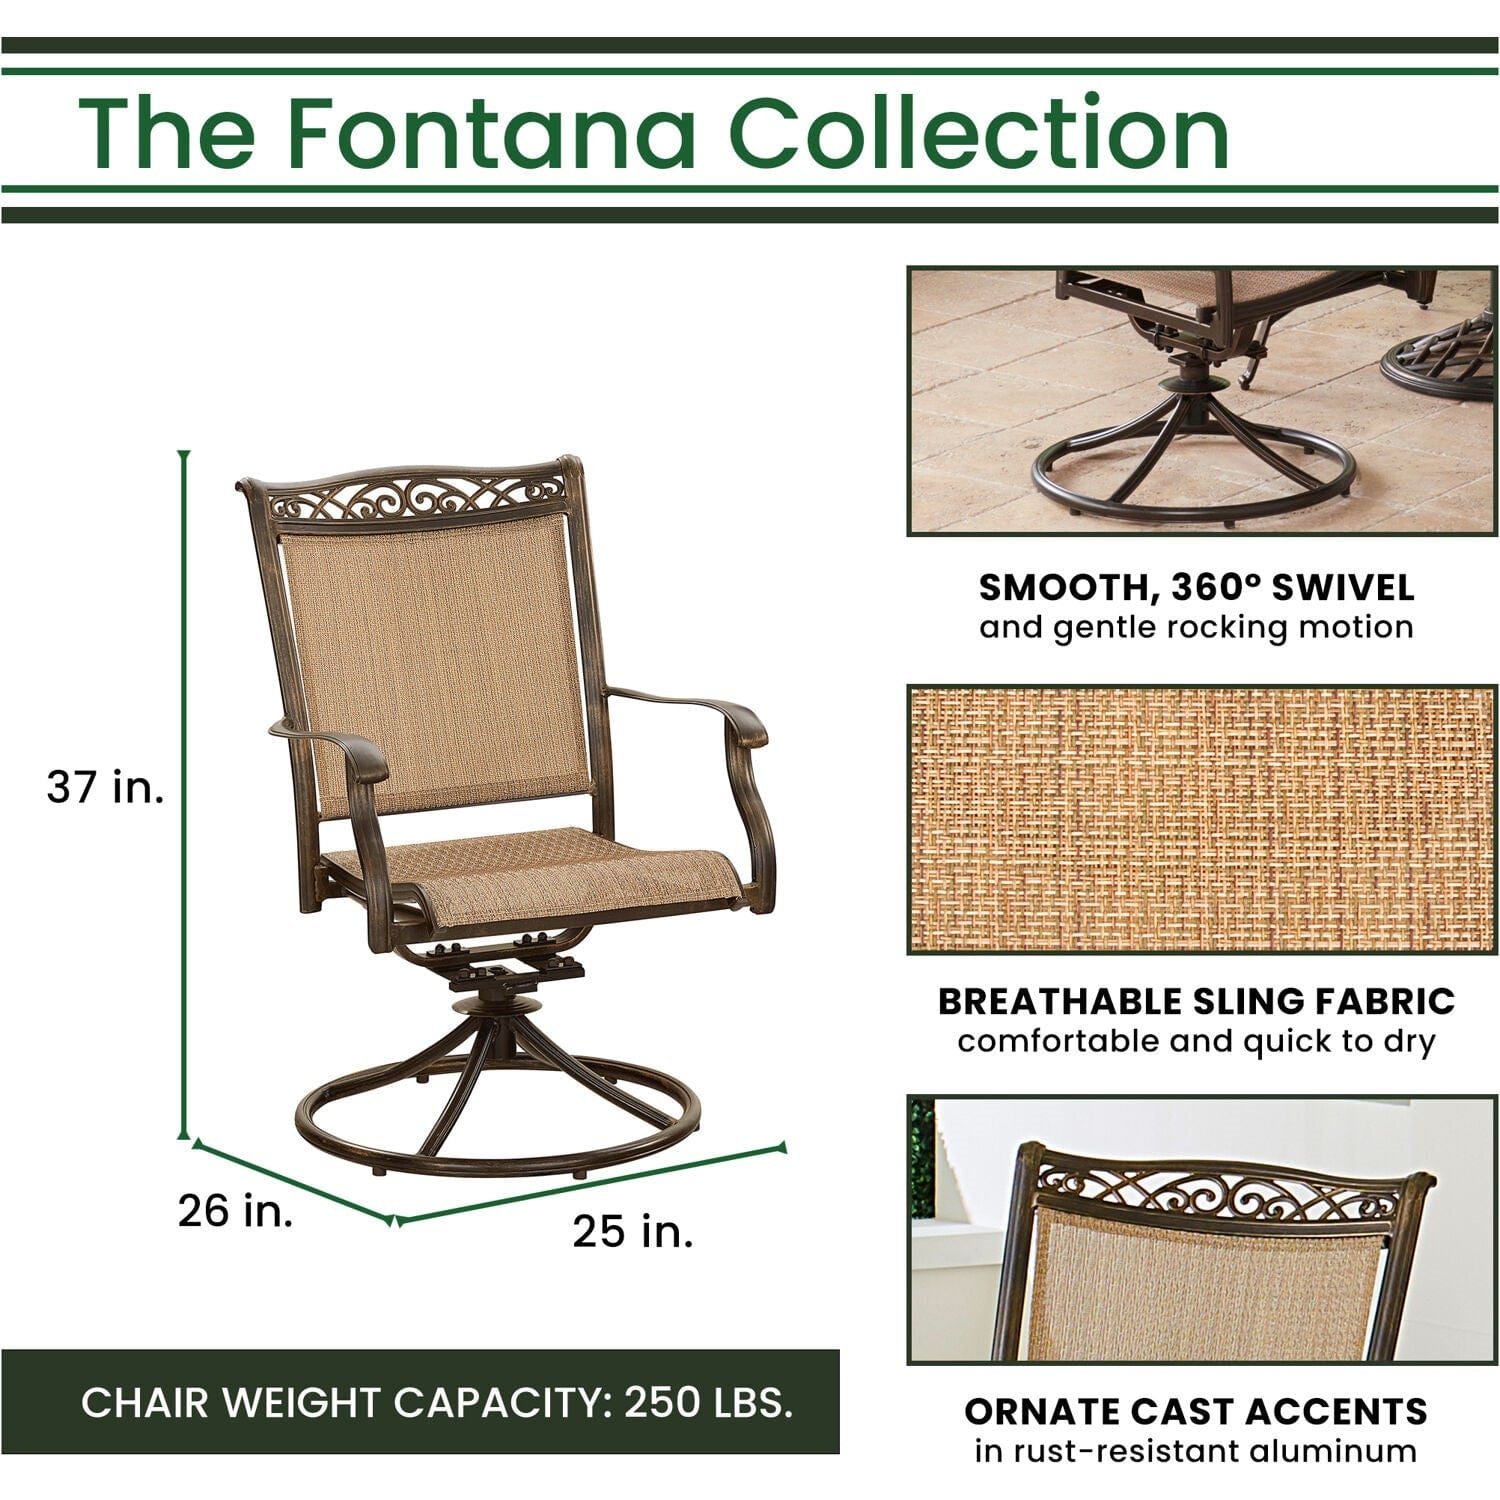 Hanover Fire Table Dining Set Hanover - Fontana 5-Piece Fire Pit Chat Set with 4 Sling Swivel Rockers and a 40,000 BTU Gas Durastone Fire Pit Coffee Table | FON5PCDSW4FP